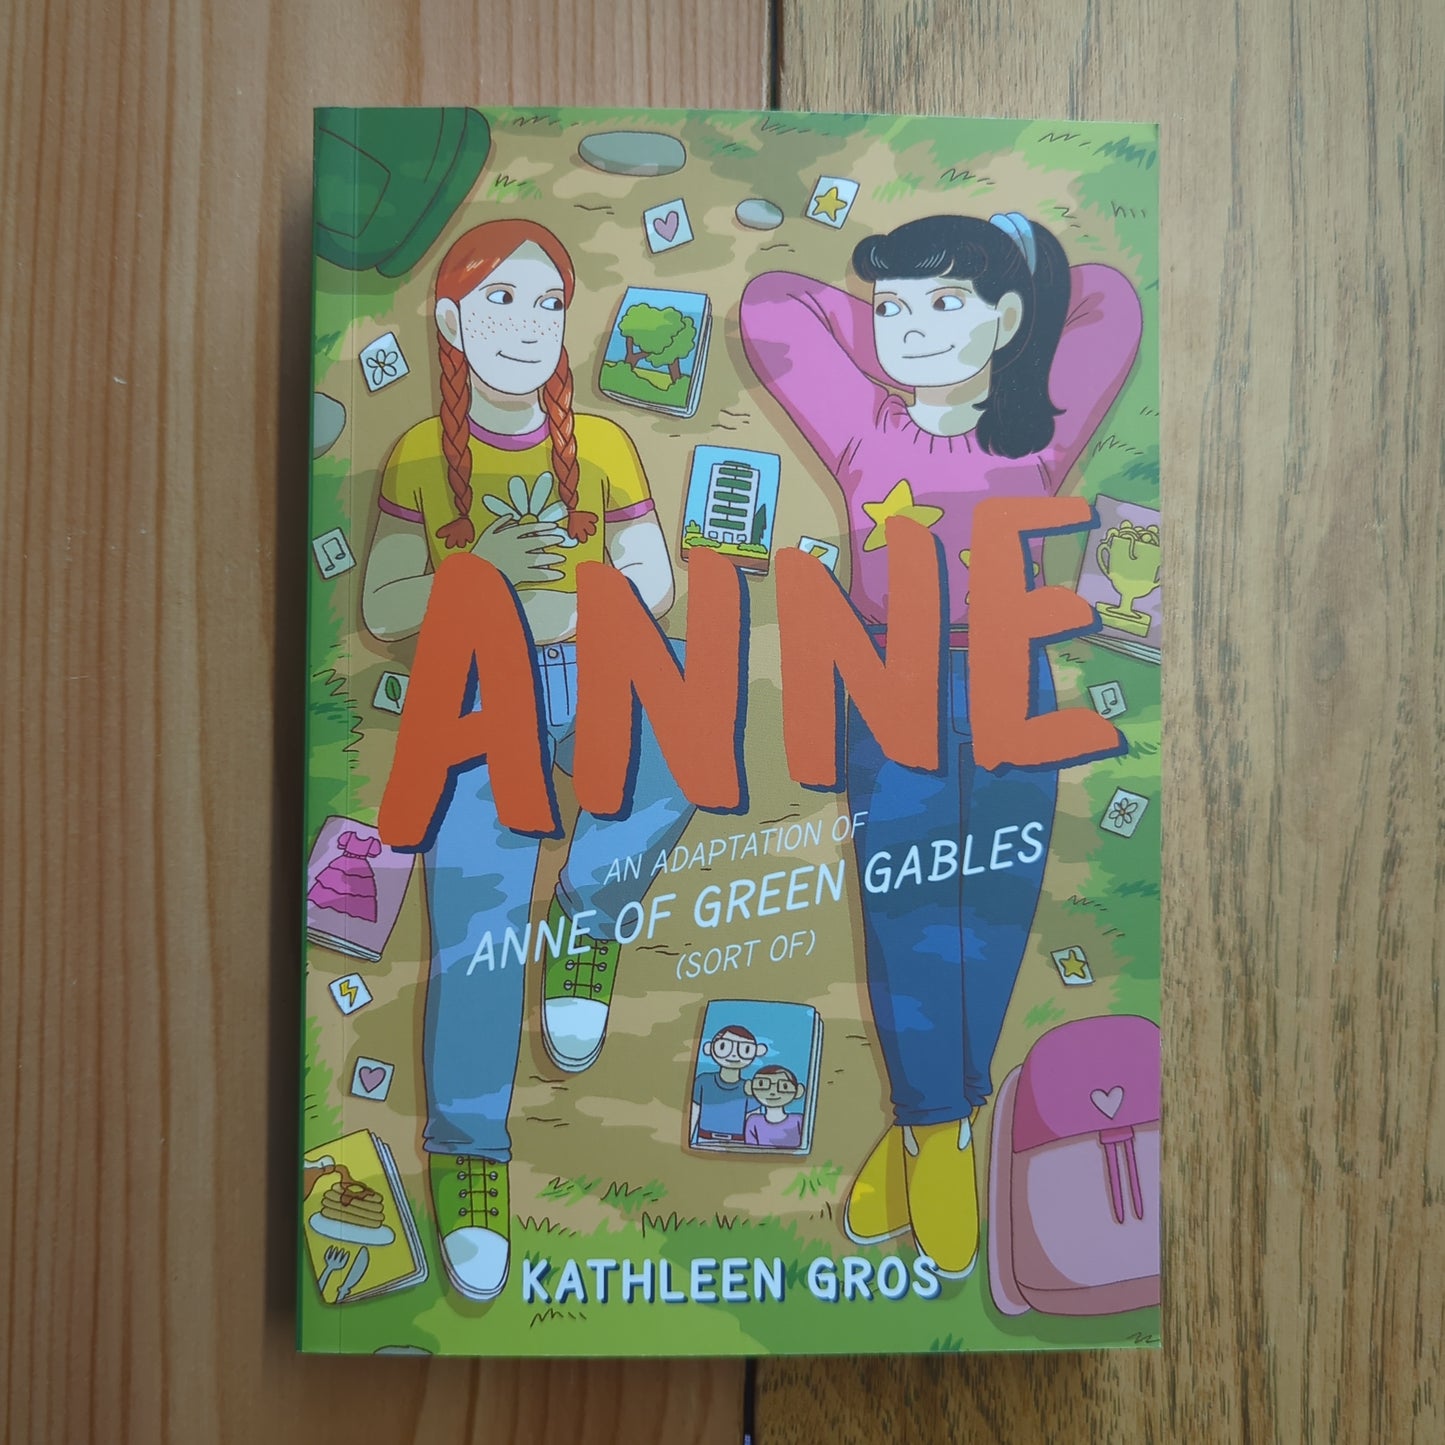 Anne: An Adaptation of Anne of Green Gables (Sort Of)